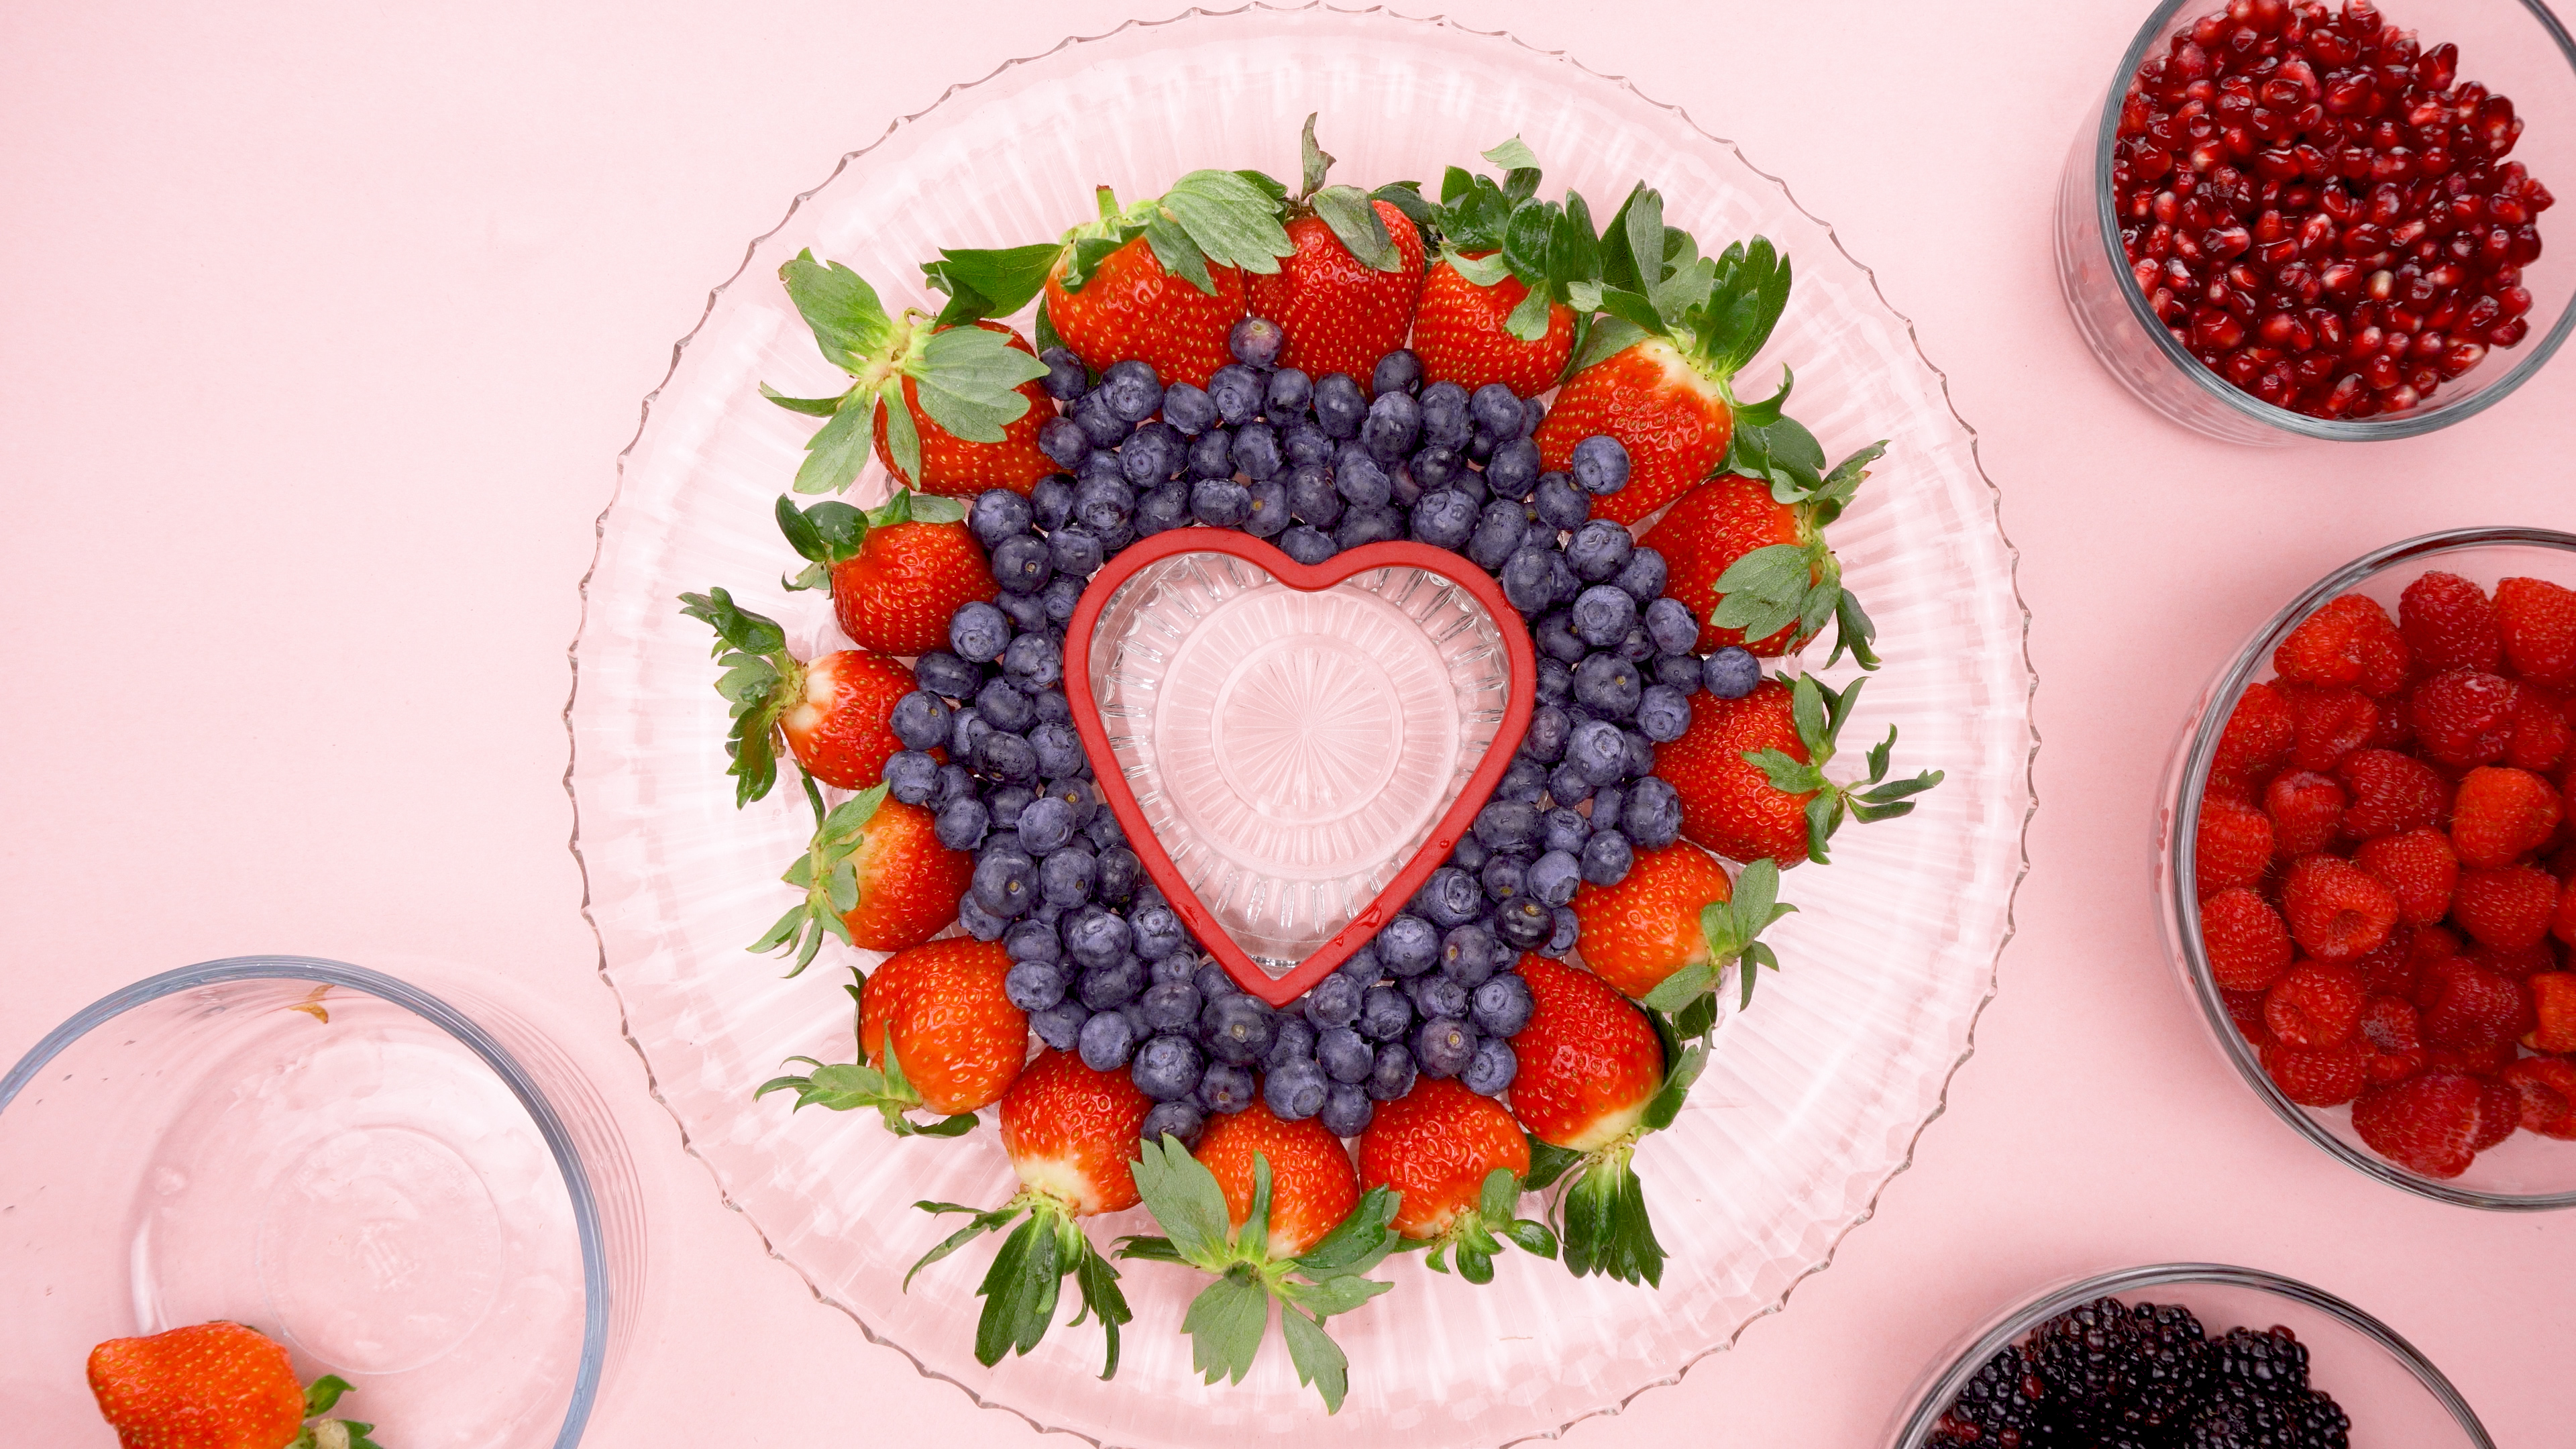 Strawberries and blueberries around a heart cookie cutter